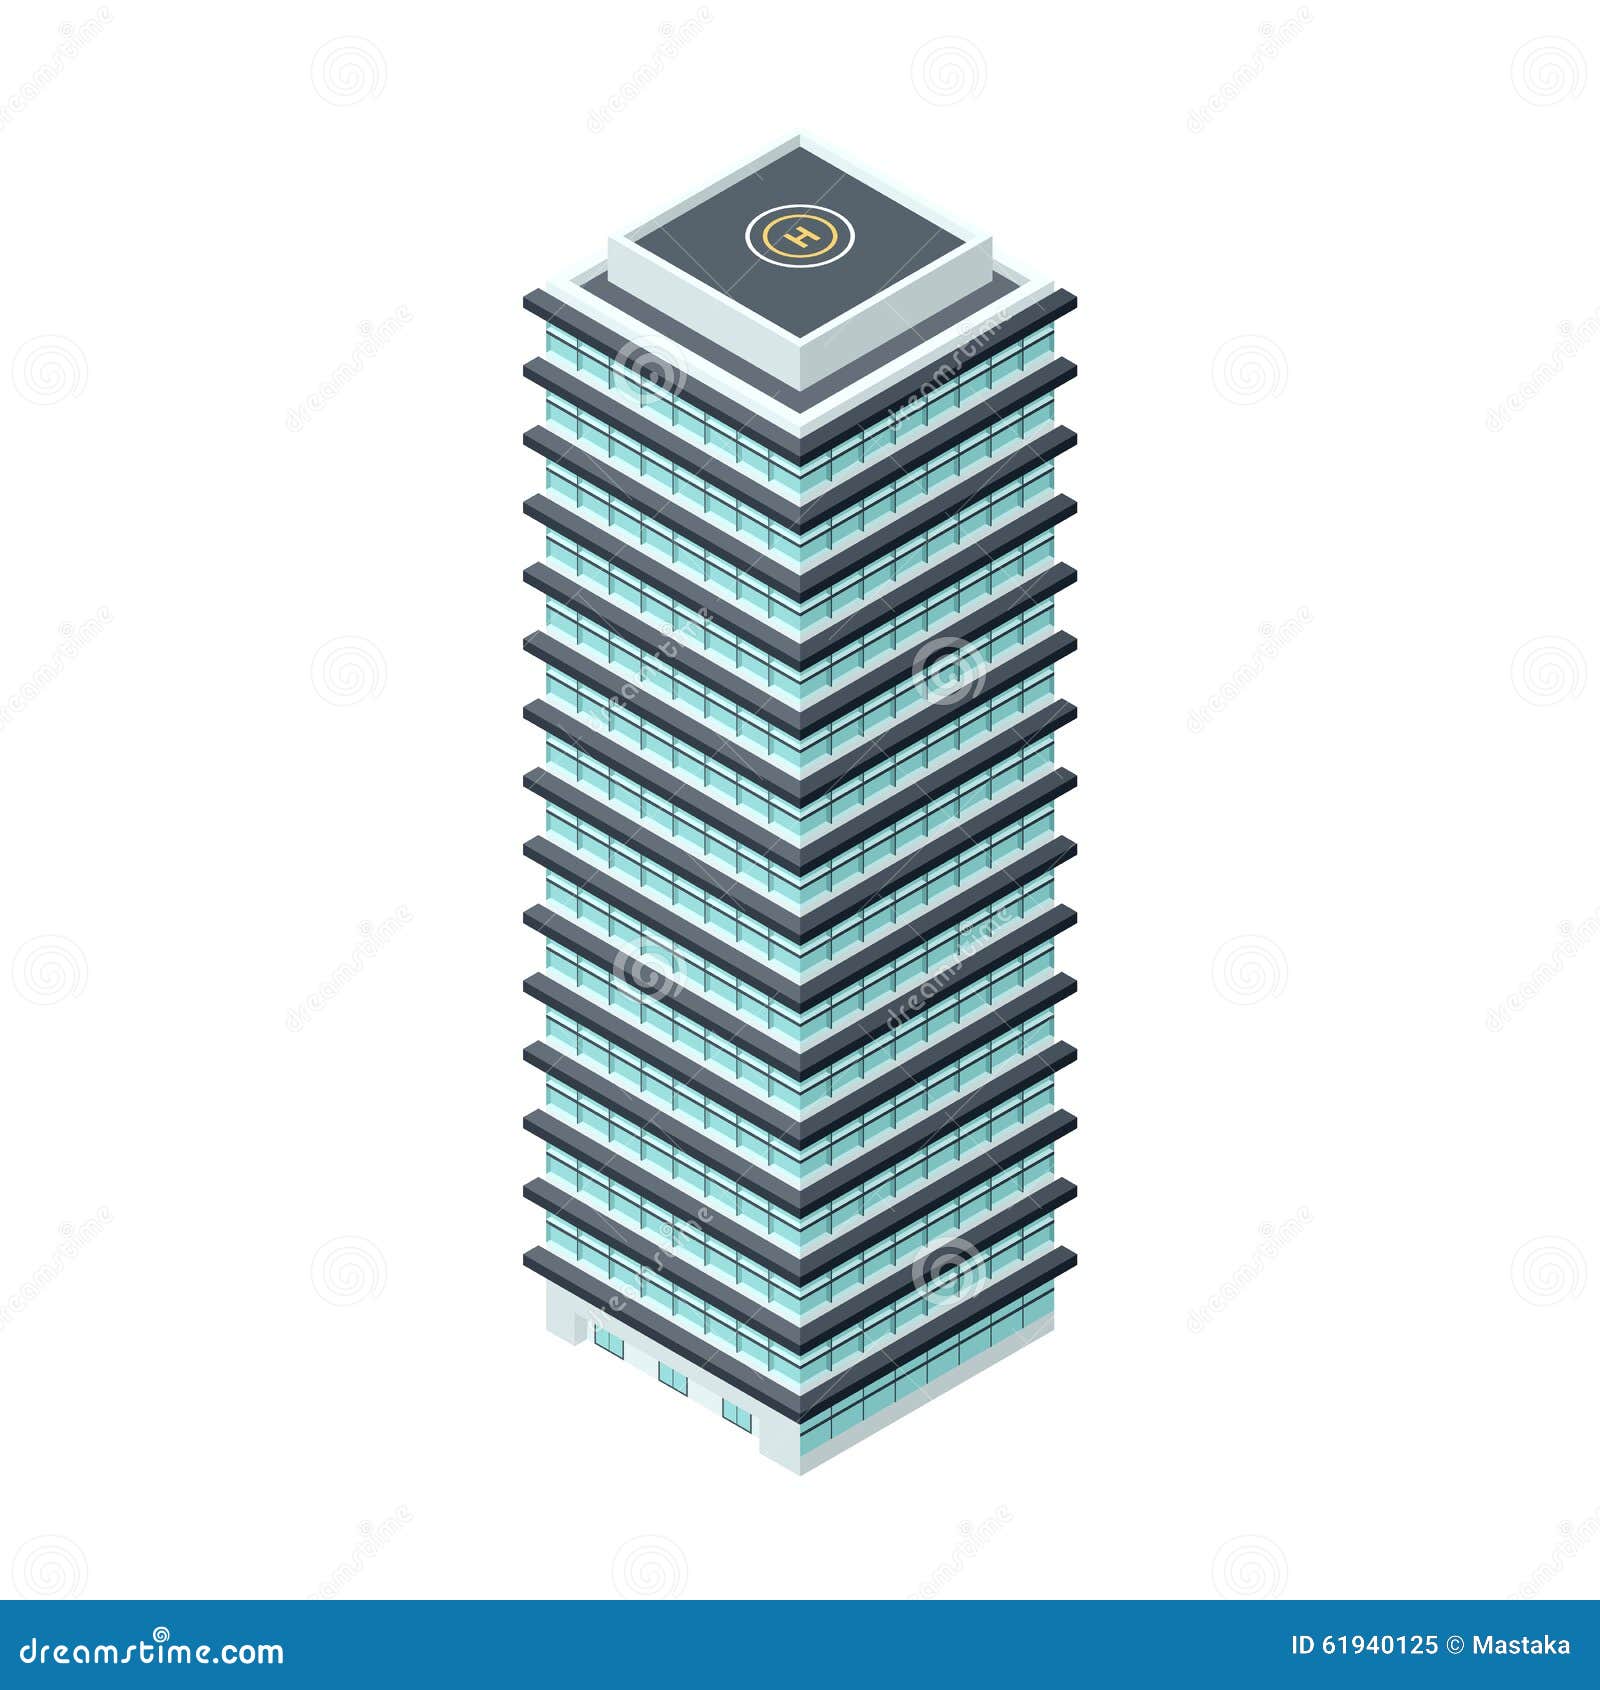 high-rise building in isometric projection